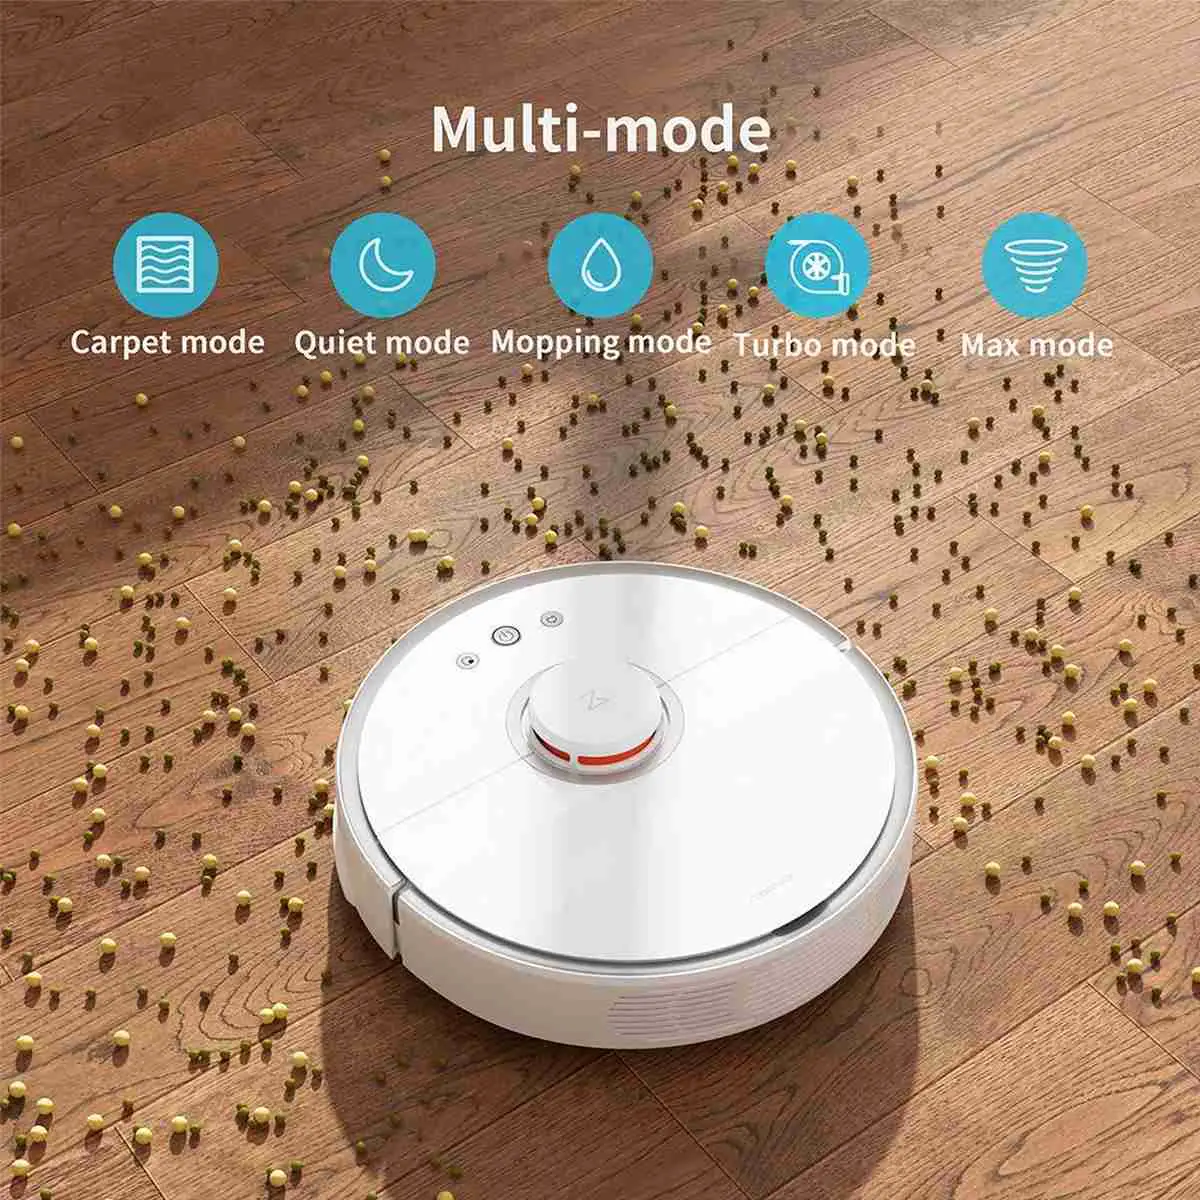 Roborock S5 Robot Vacuum Cleaner | Top Gadgets To Speed Up Your Spring Cleaning